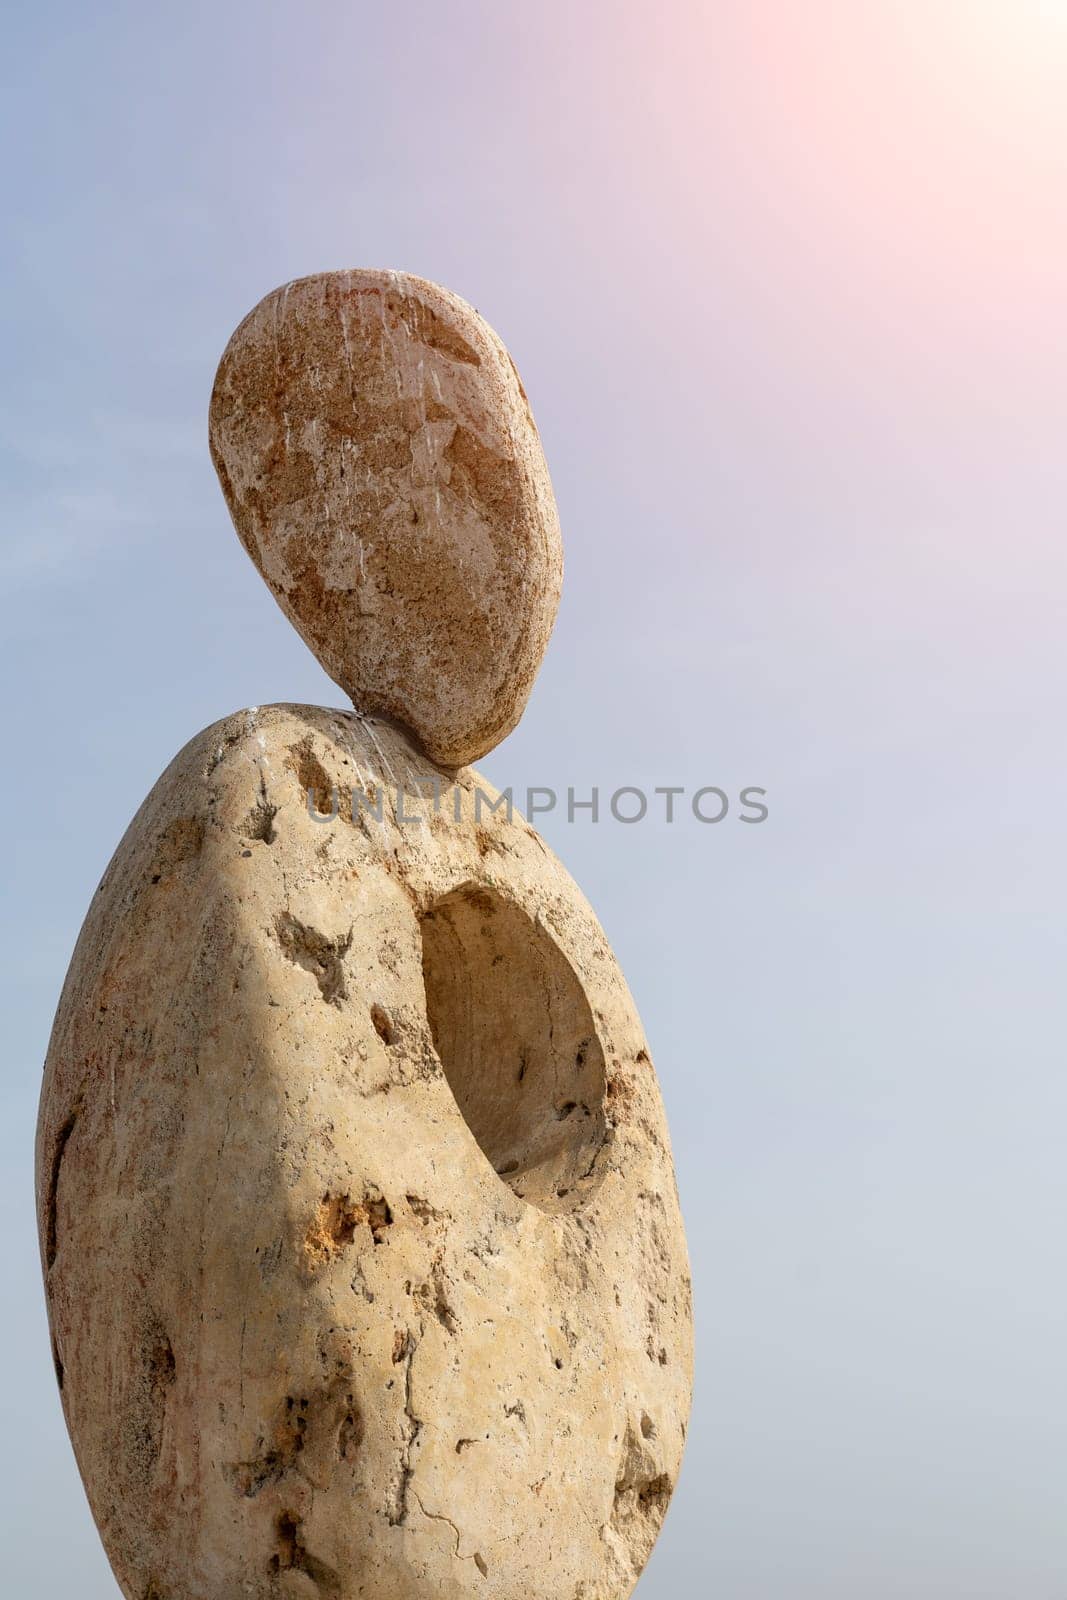 Sculpture symbol made of large pebbles against the blue sky by Matiunina